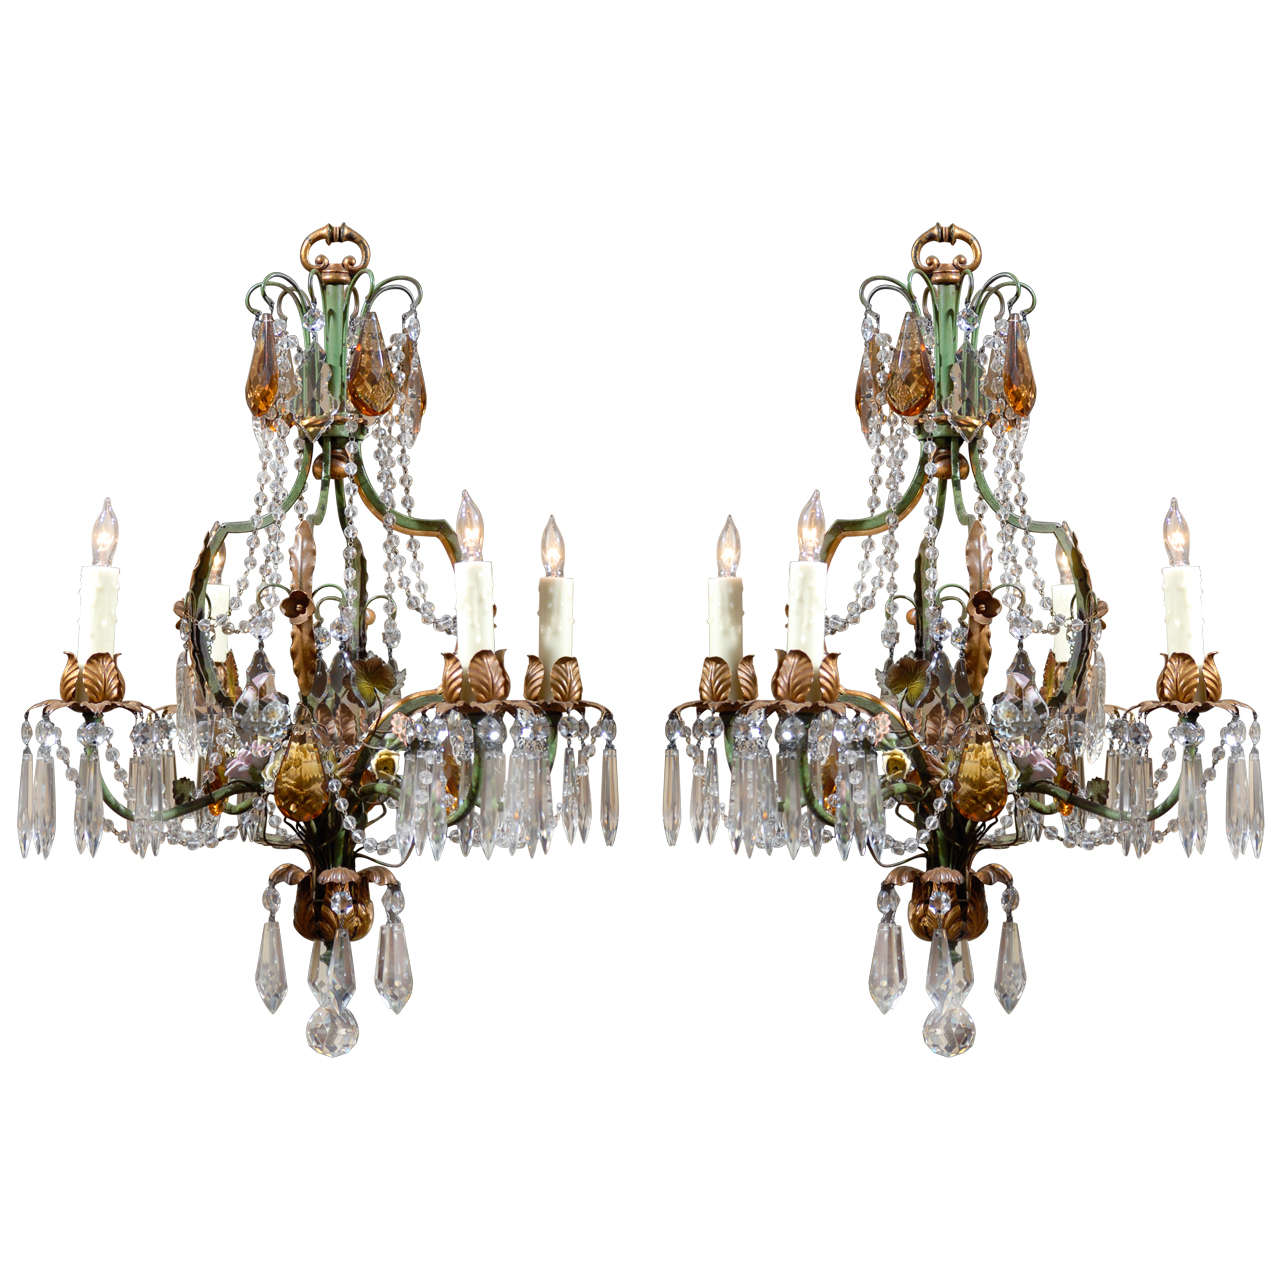 Pr. Early 20th C. Italian Iron, Crystal, & Porcelain Chandeliers For Sale